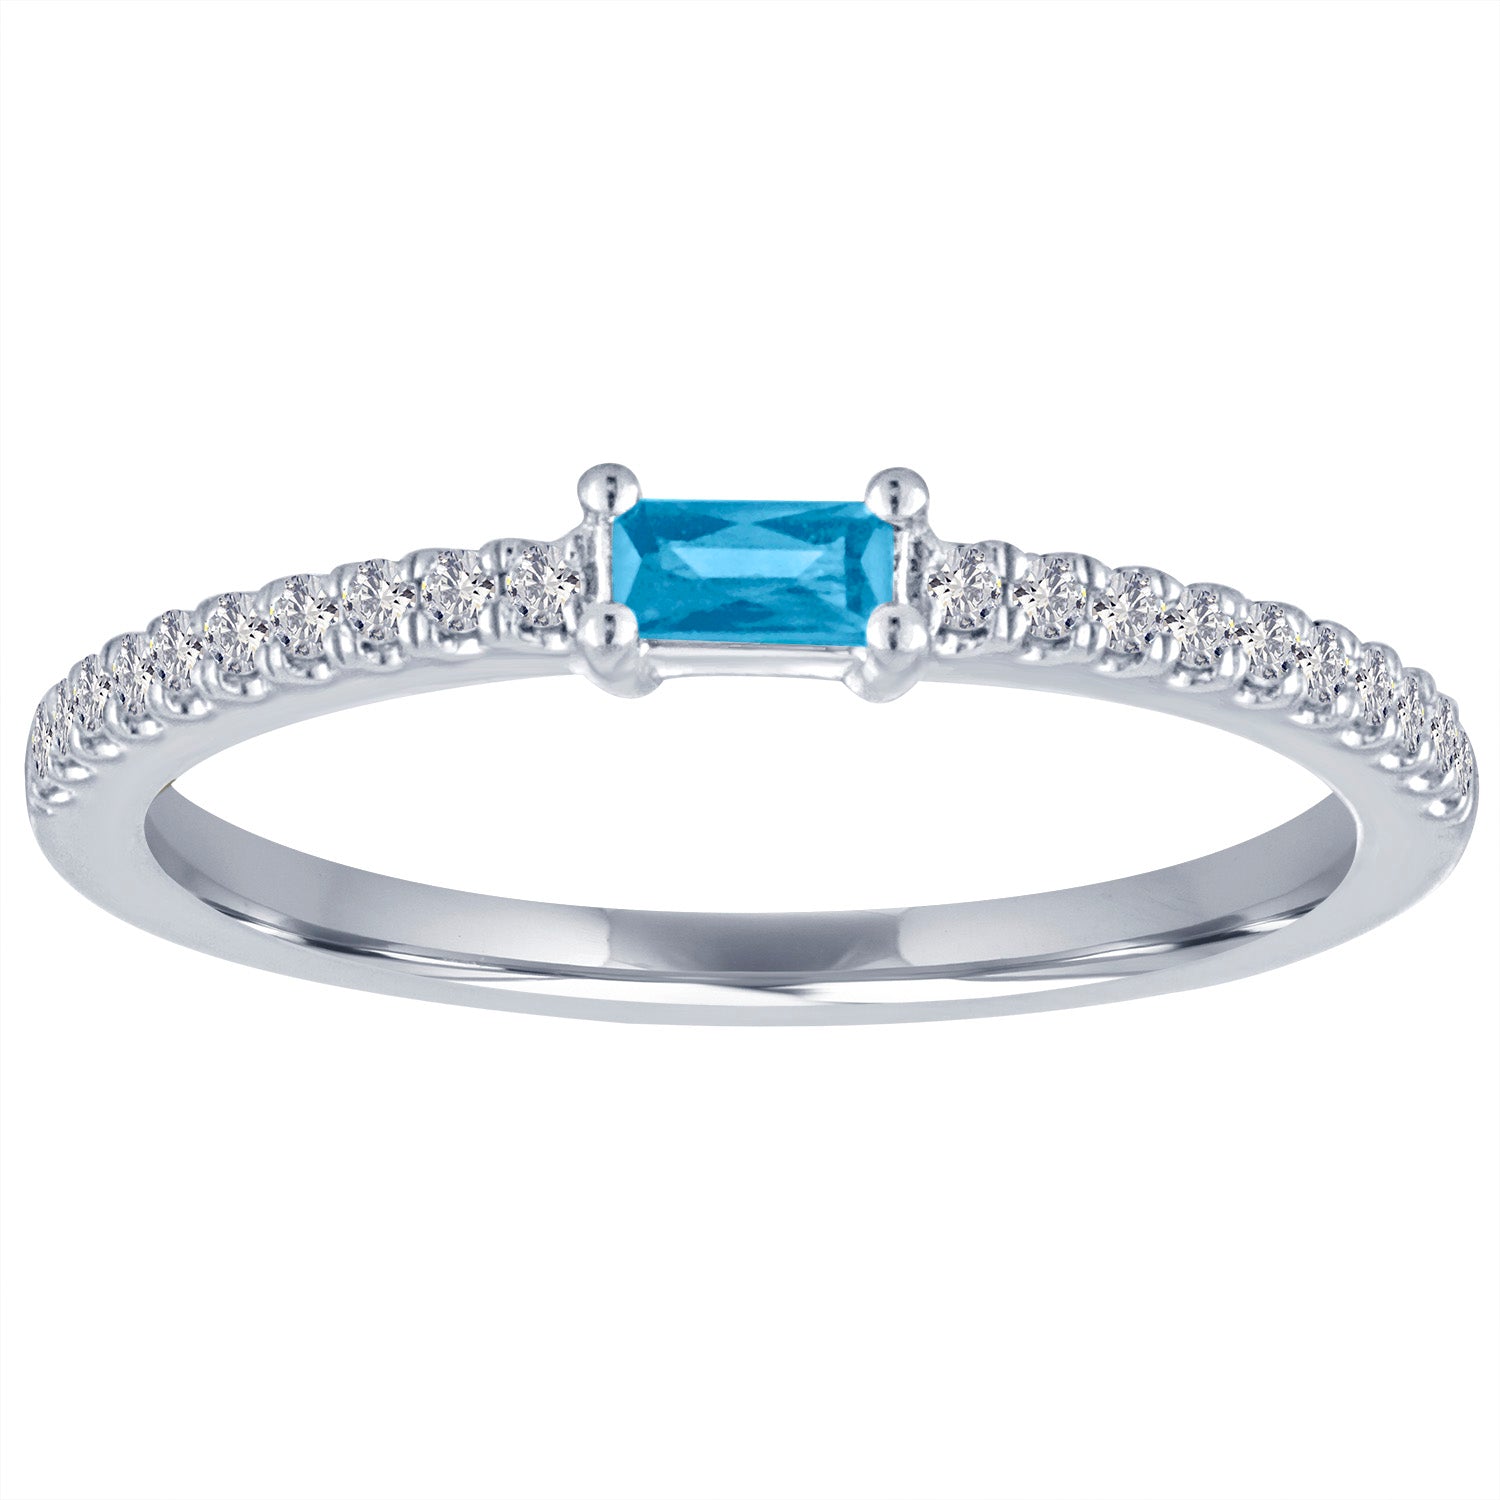 White gold skinny band with a blue topaz baguette in the center and round diamonds on the shank.